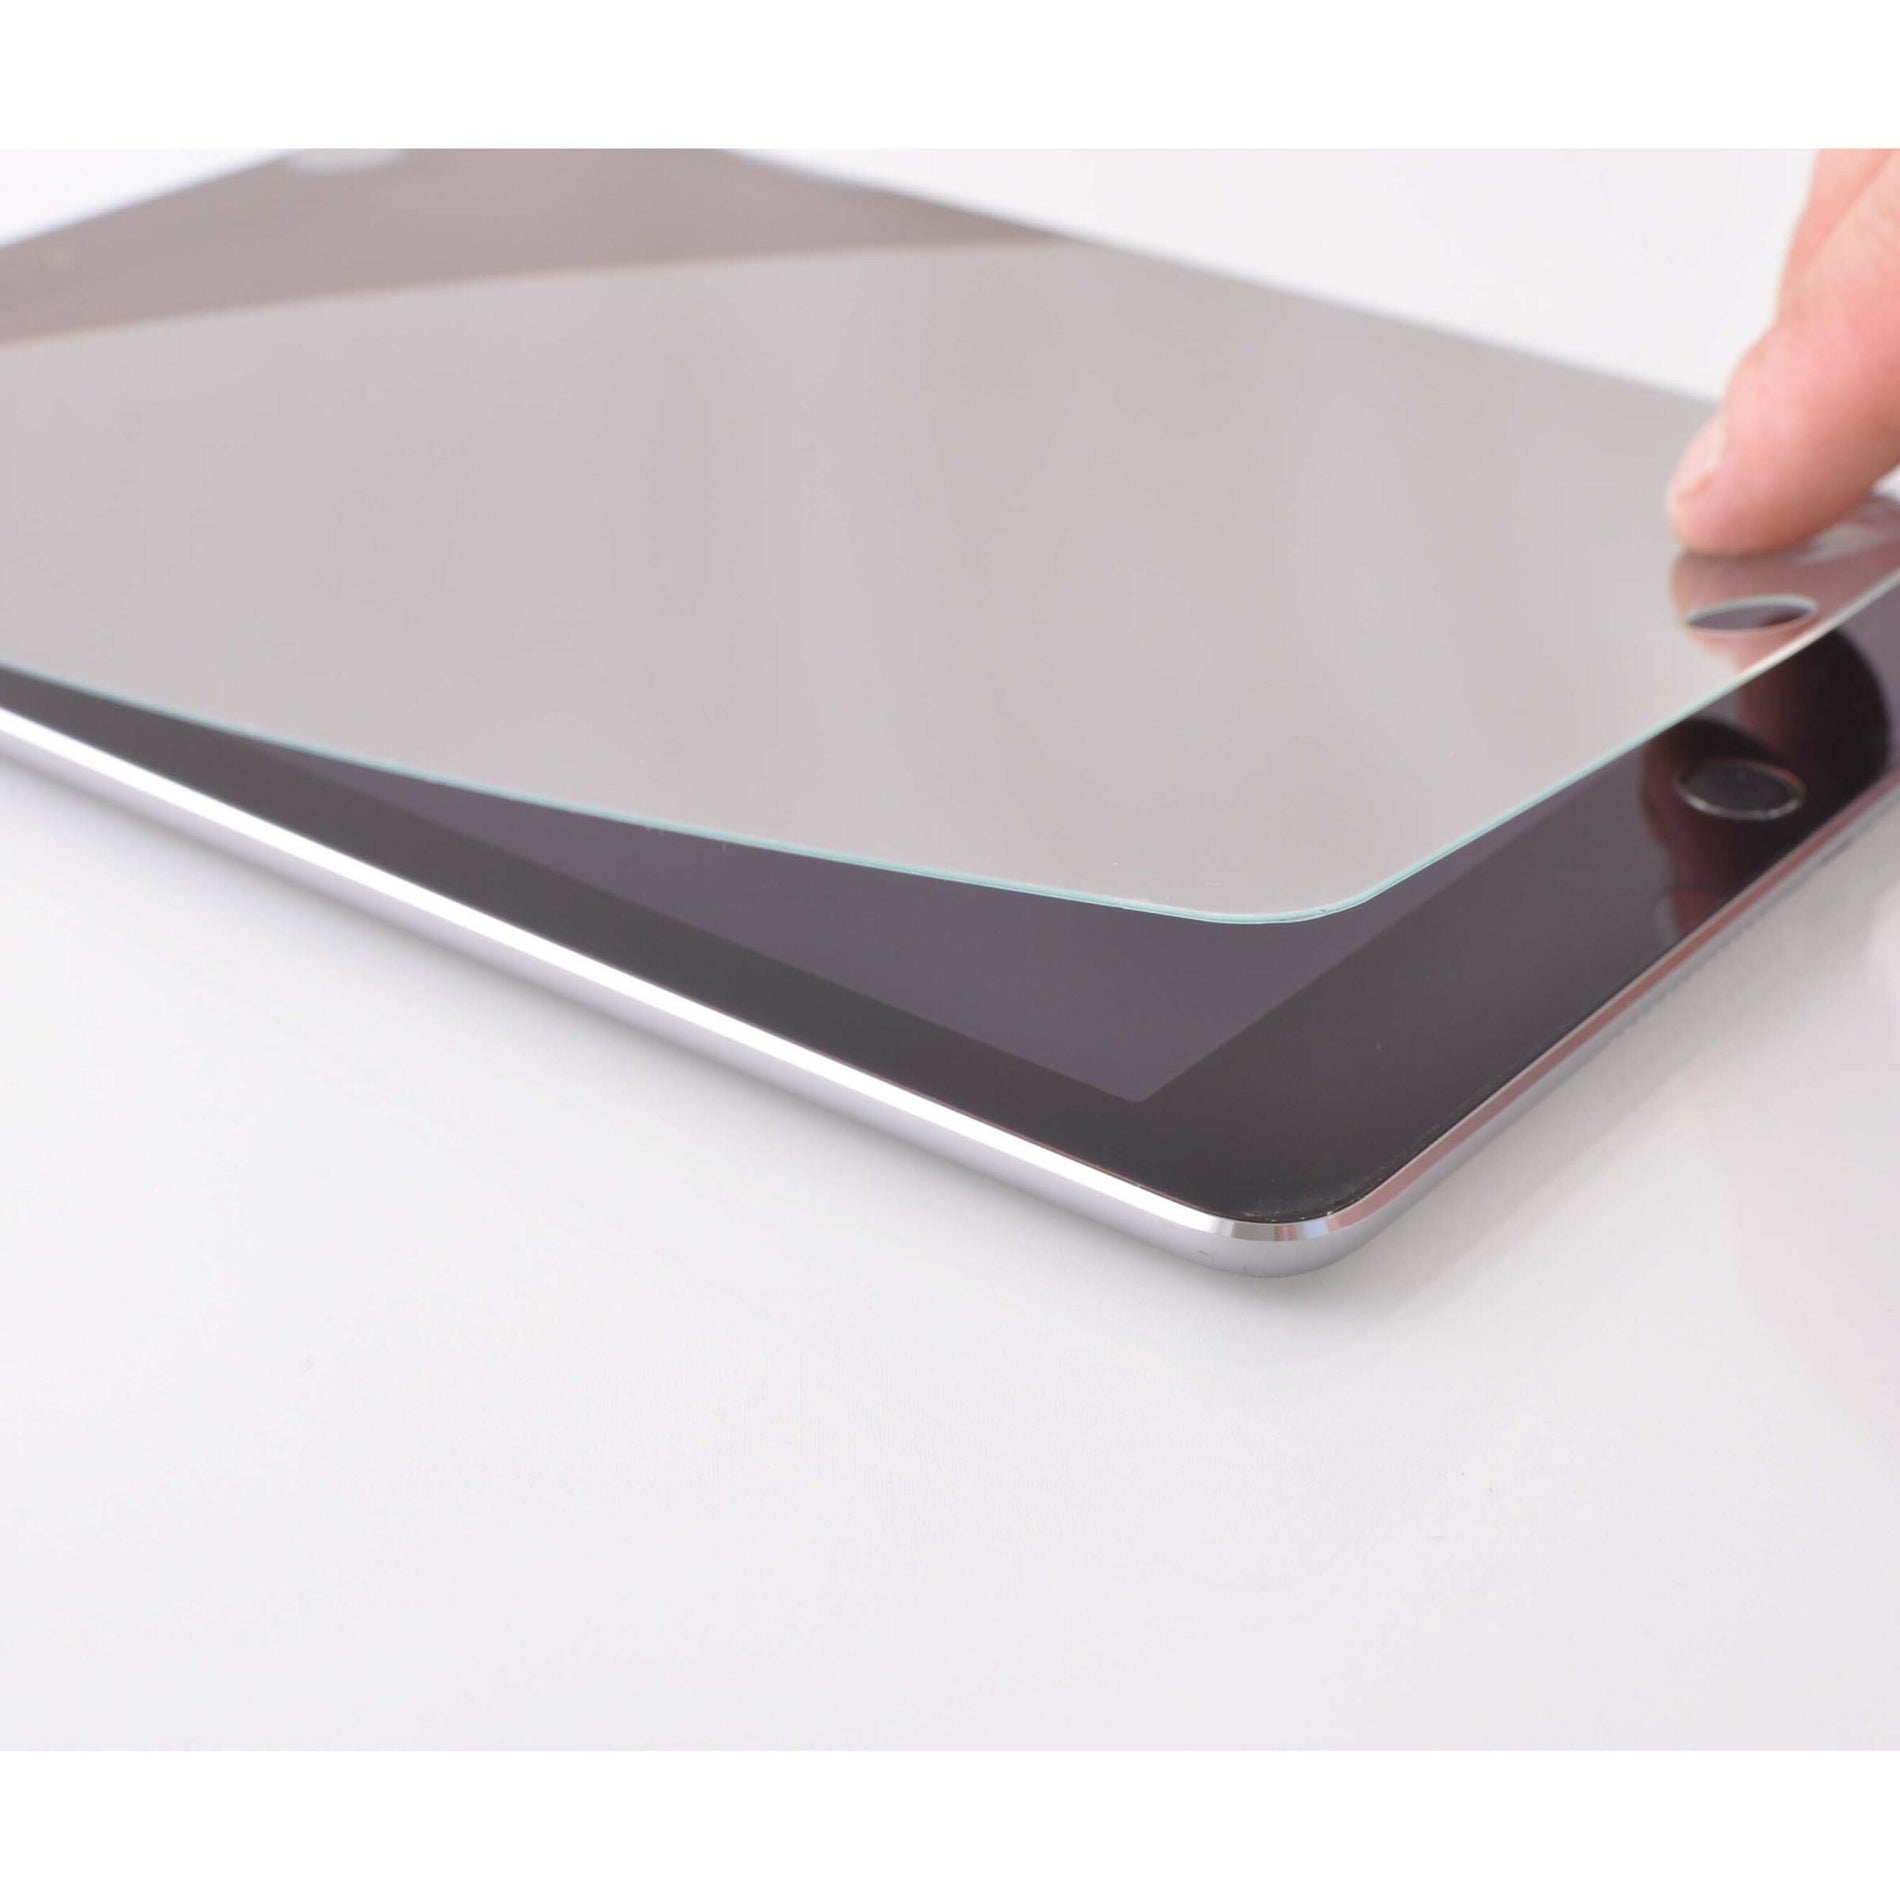 CODi A09015 Tempered Glass Screen Protector for iPad Air & Air 2, High Clarity, Touch Sensitive, Oleophobic Coating